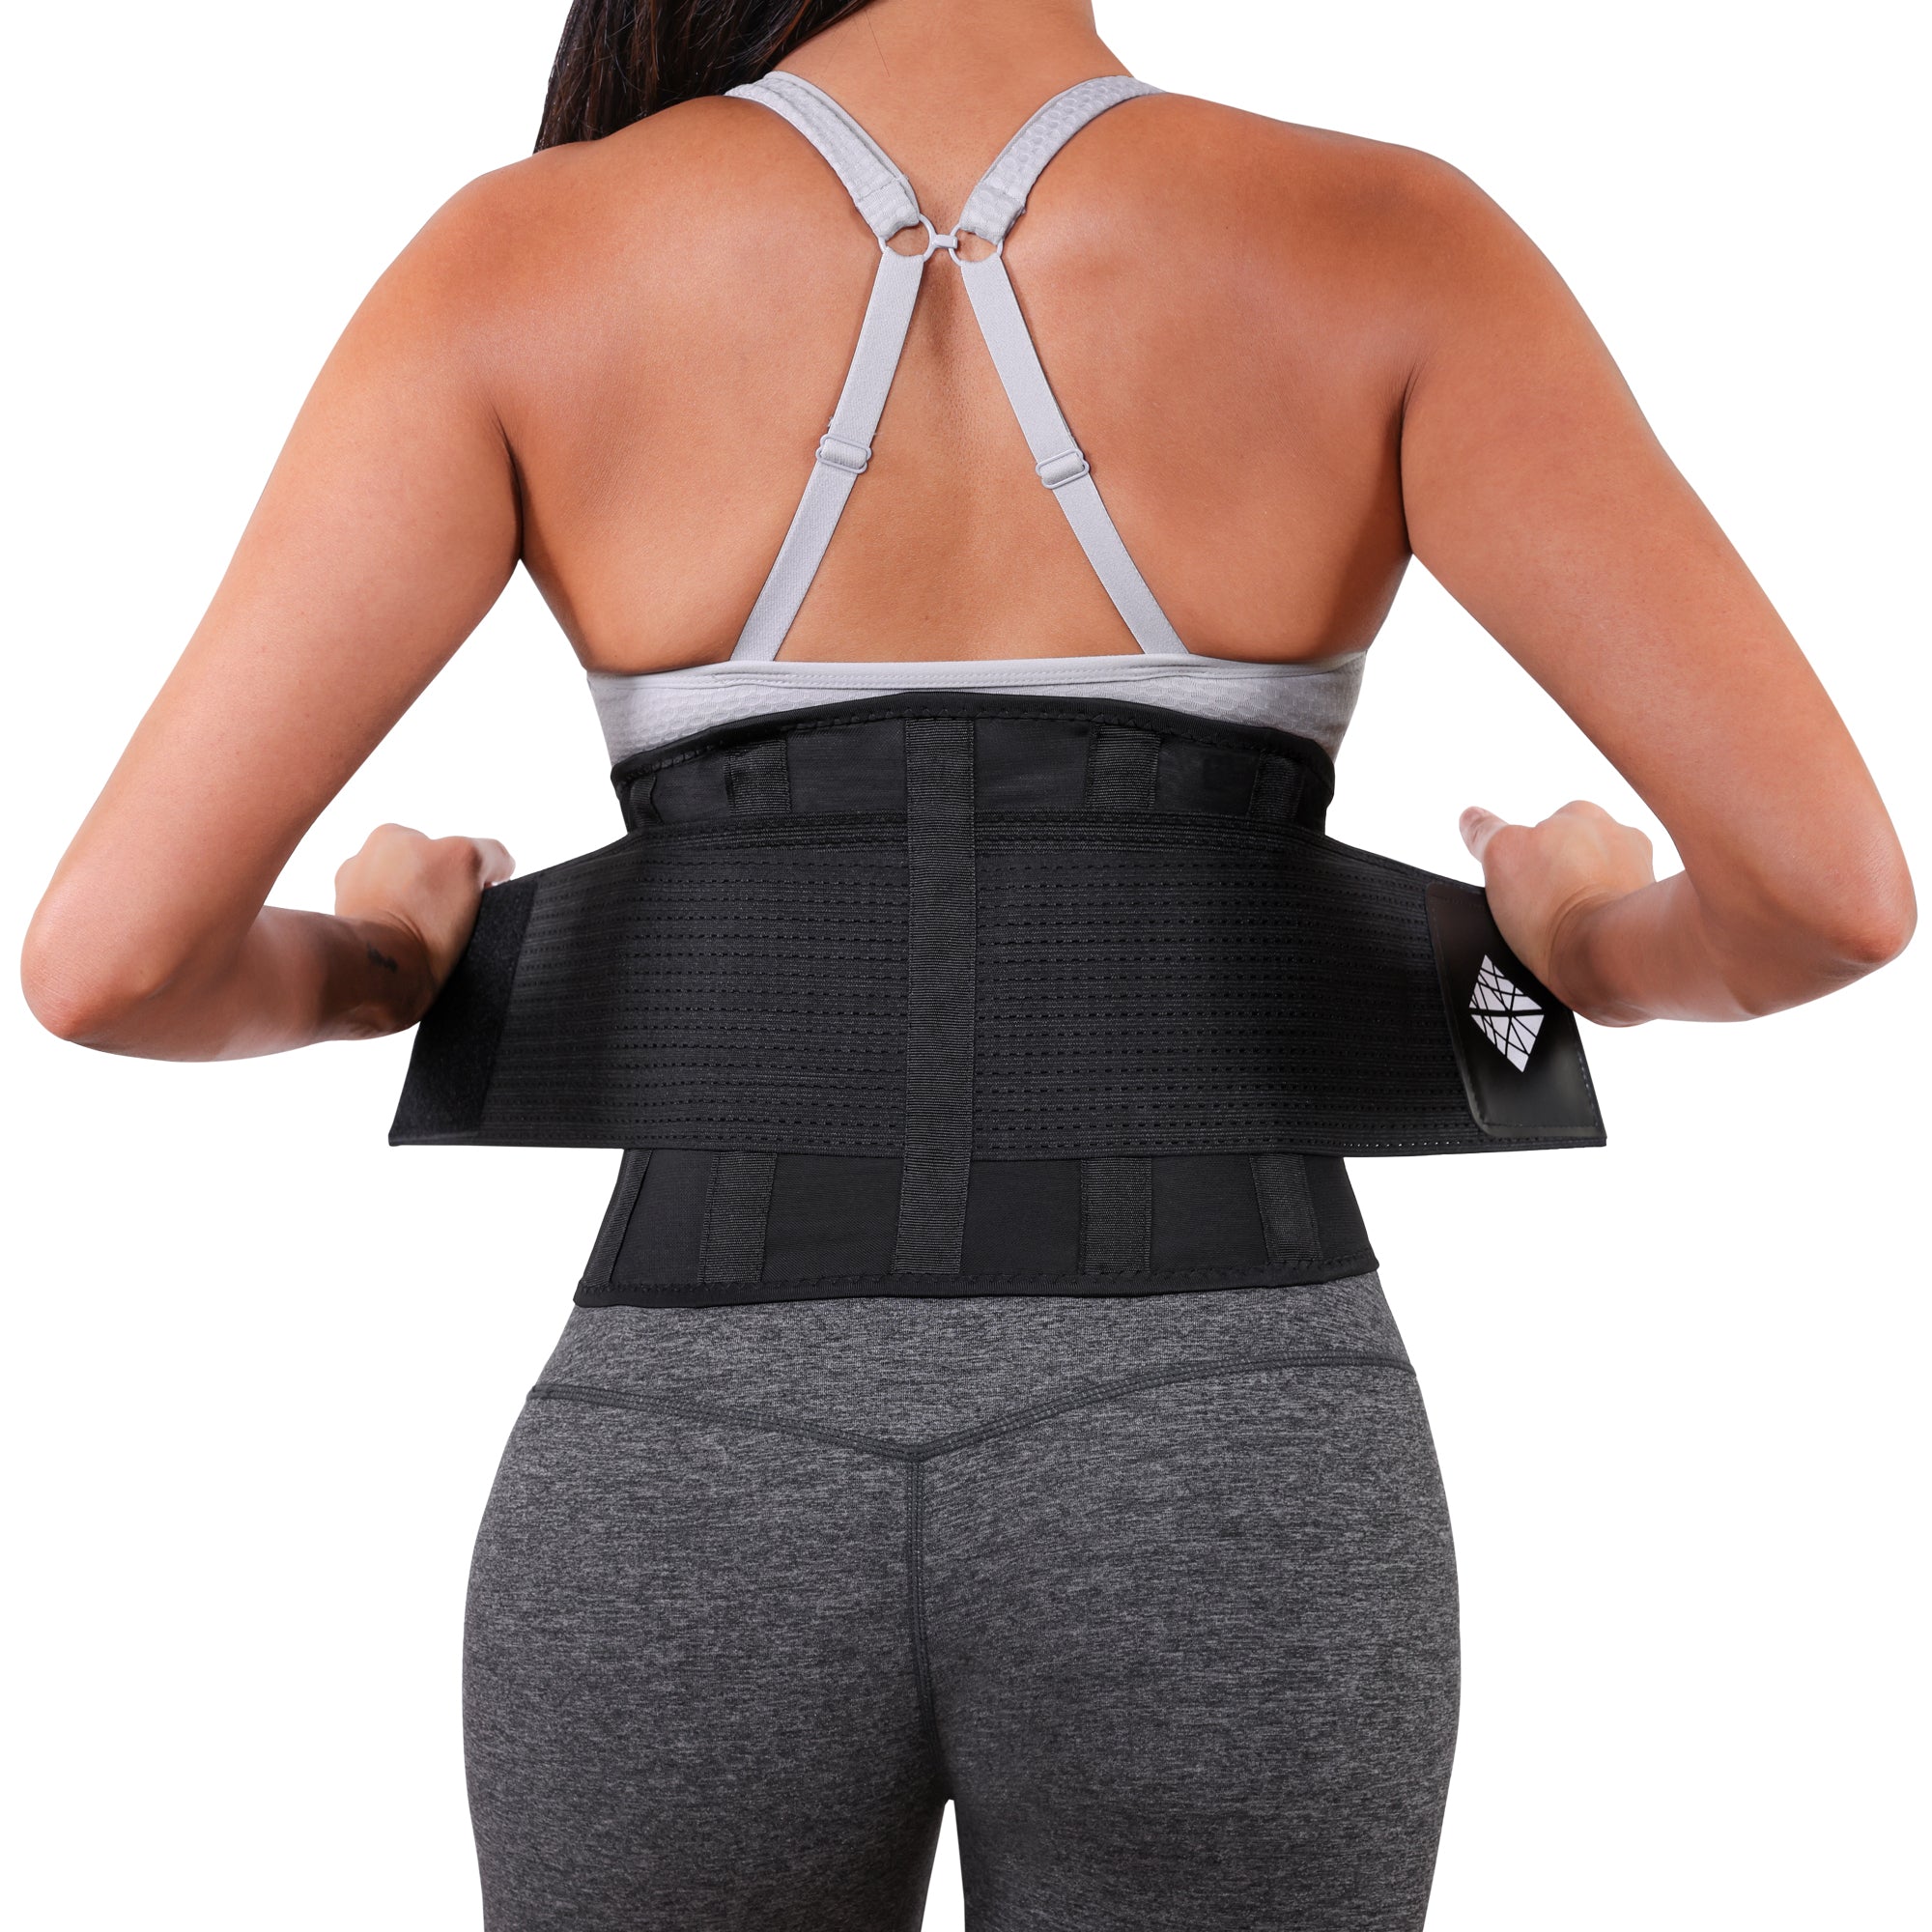  KDD Lumbar Support Belt for Women with 12 Stays, Extra